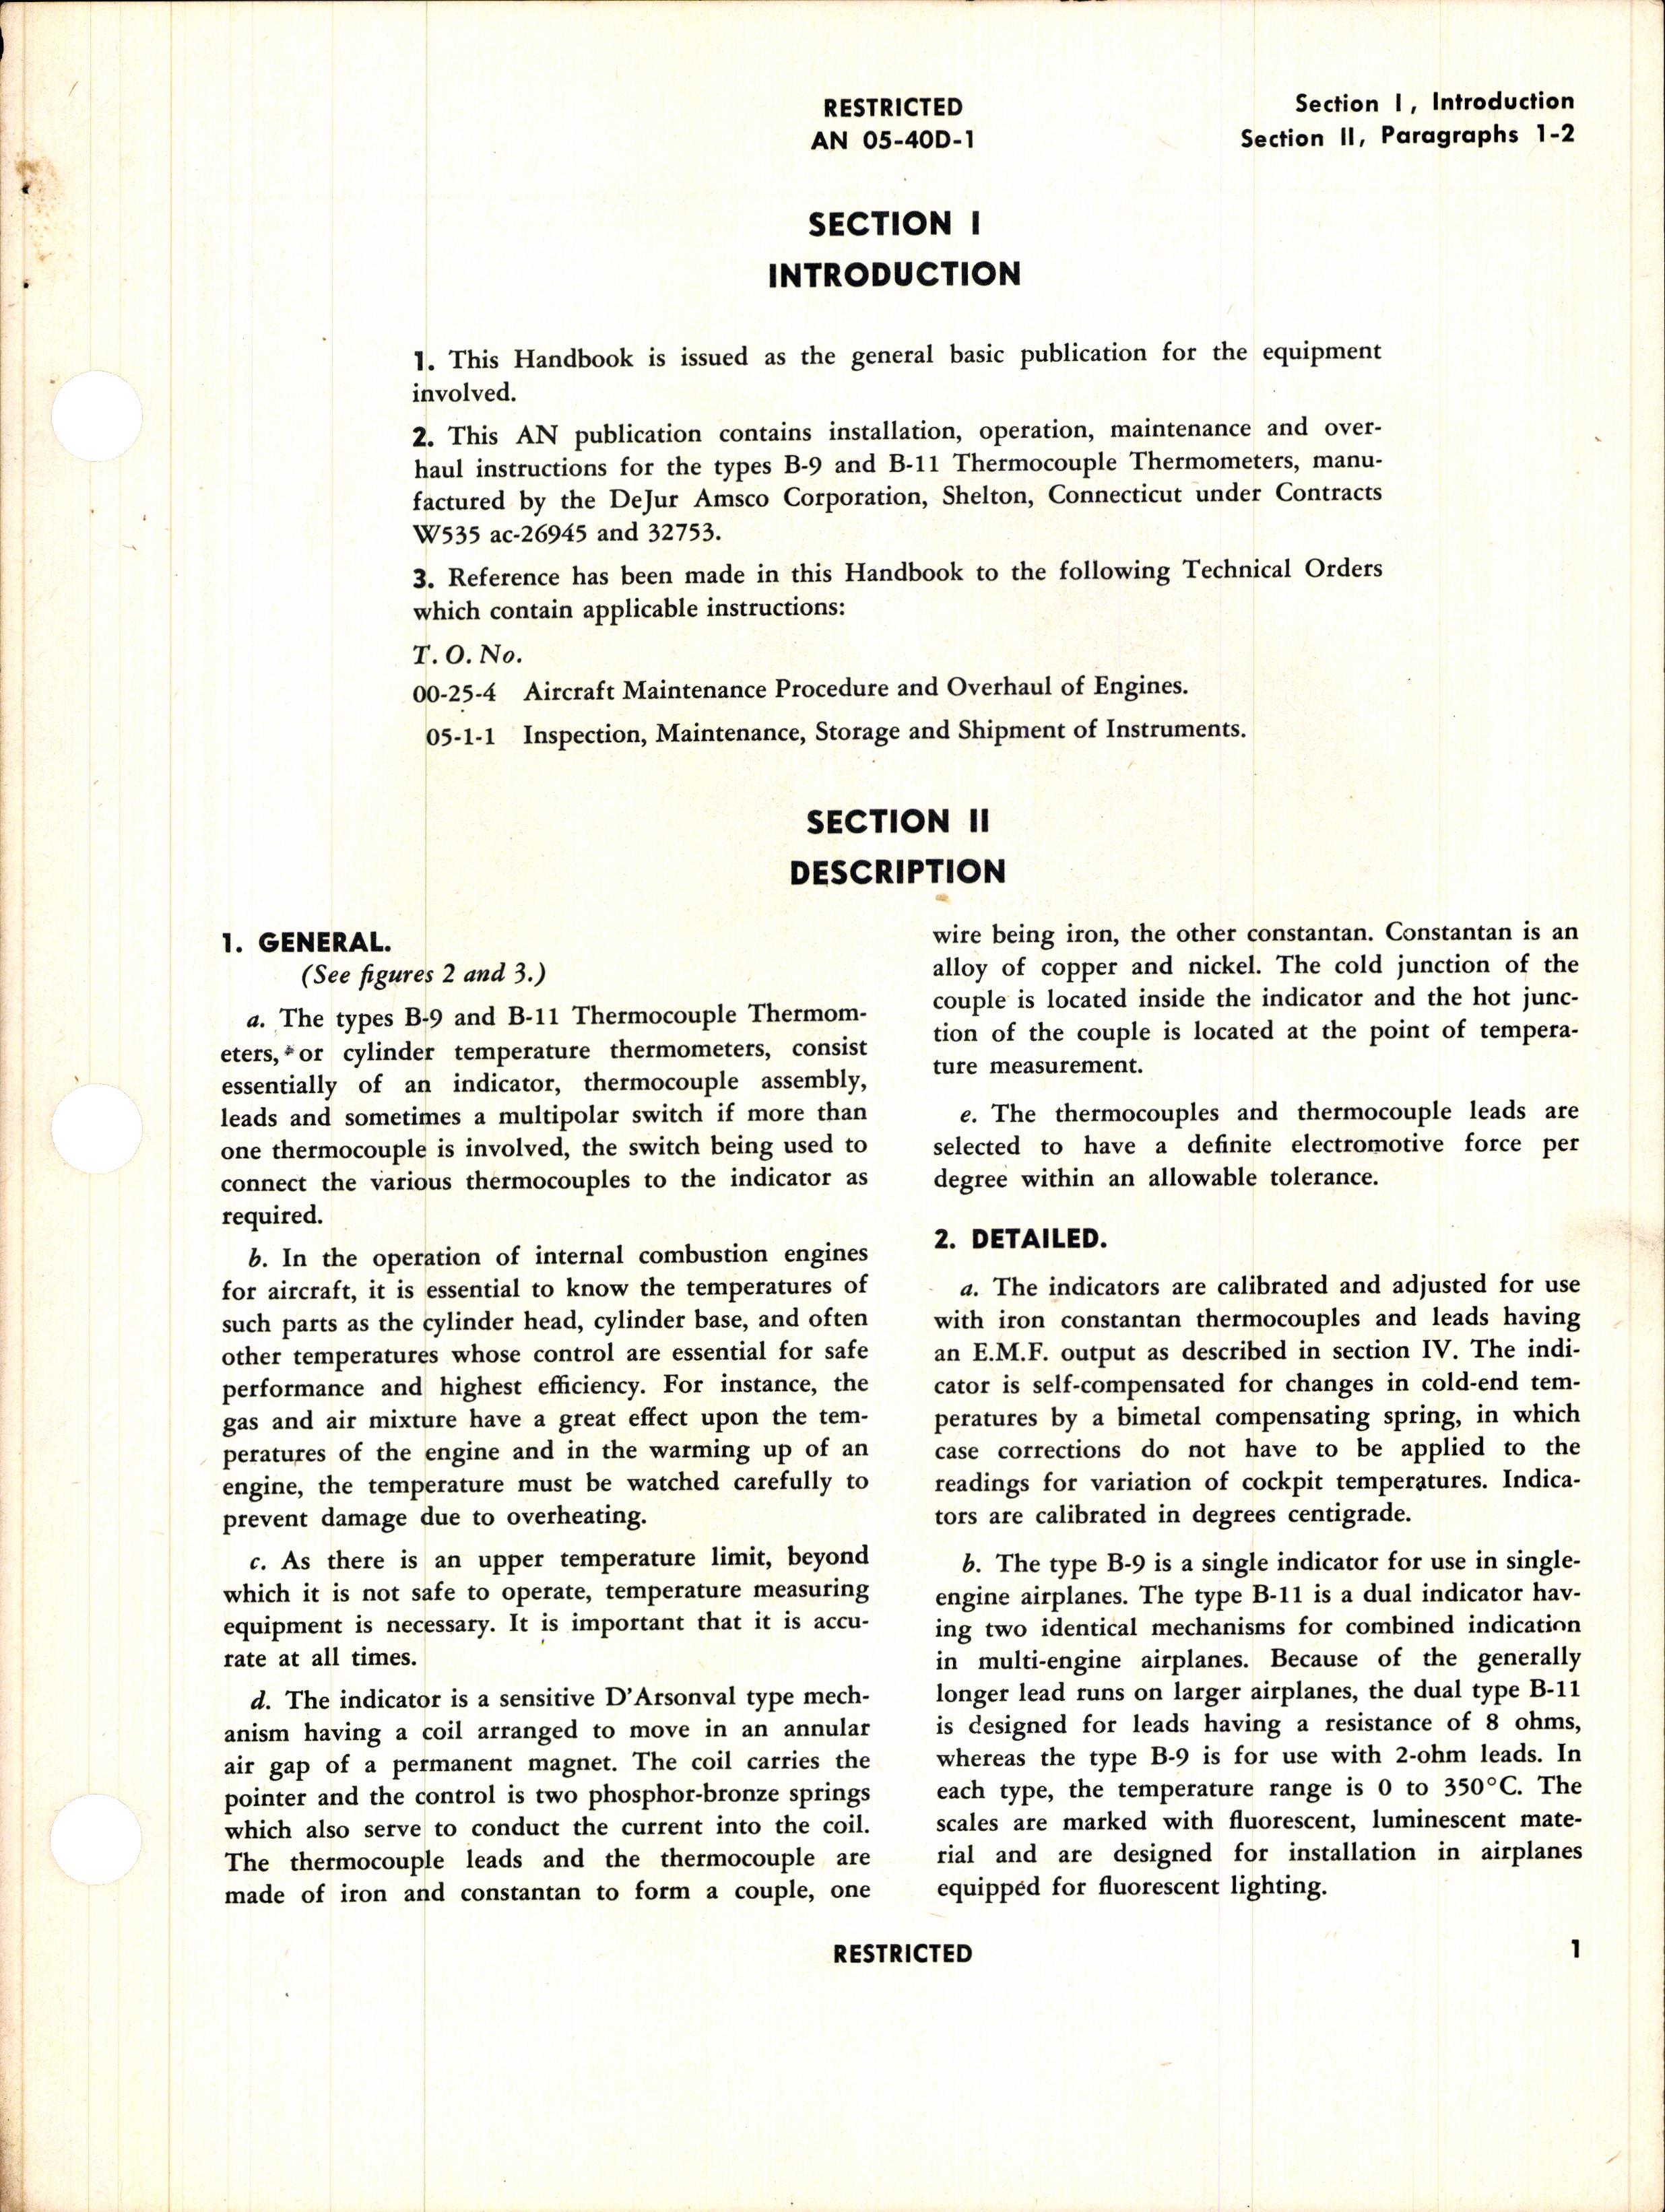 Sample page 5 from AirCorps Library document: Operation, Service, and Overhaul Instructions with Parts Catalog for Type B-9 and B-11 Thermocouple Thermometers